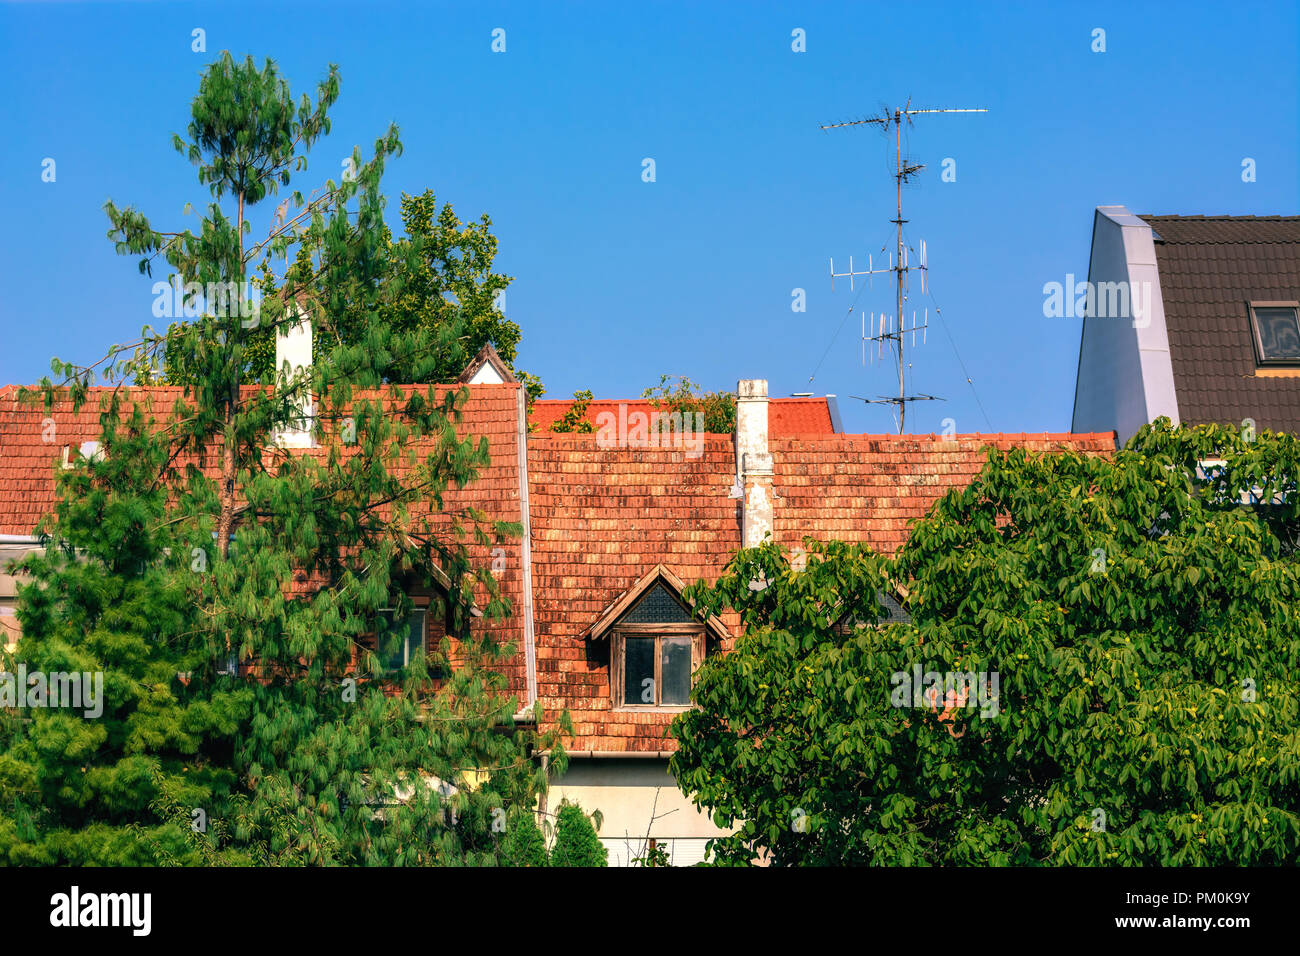 View of the roof of red tiles with a TV antenna, against the blue sky through the green foliage of trees. Stock Photo